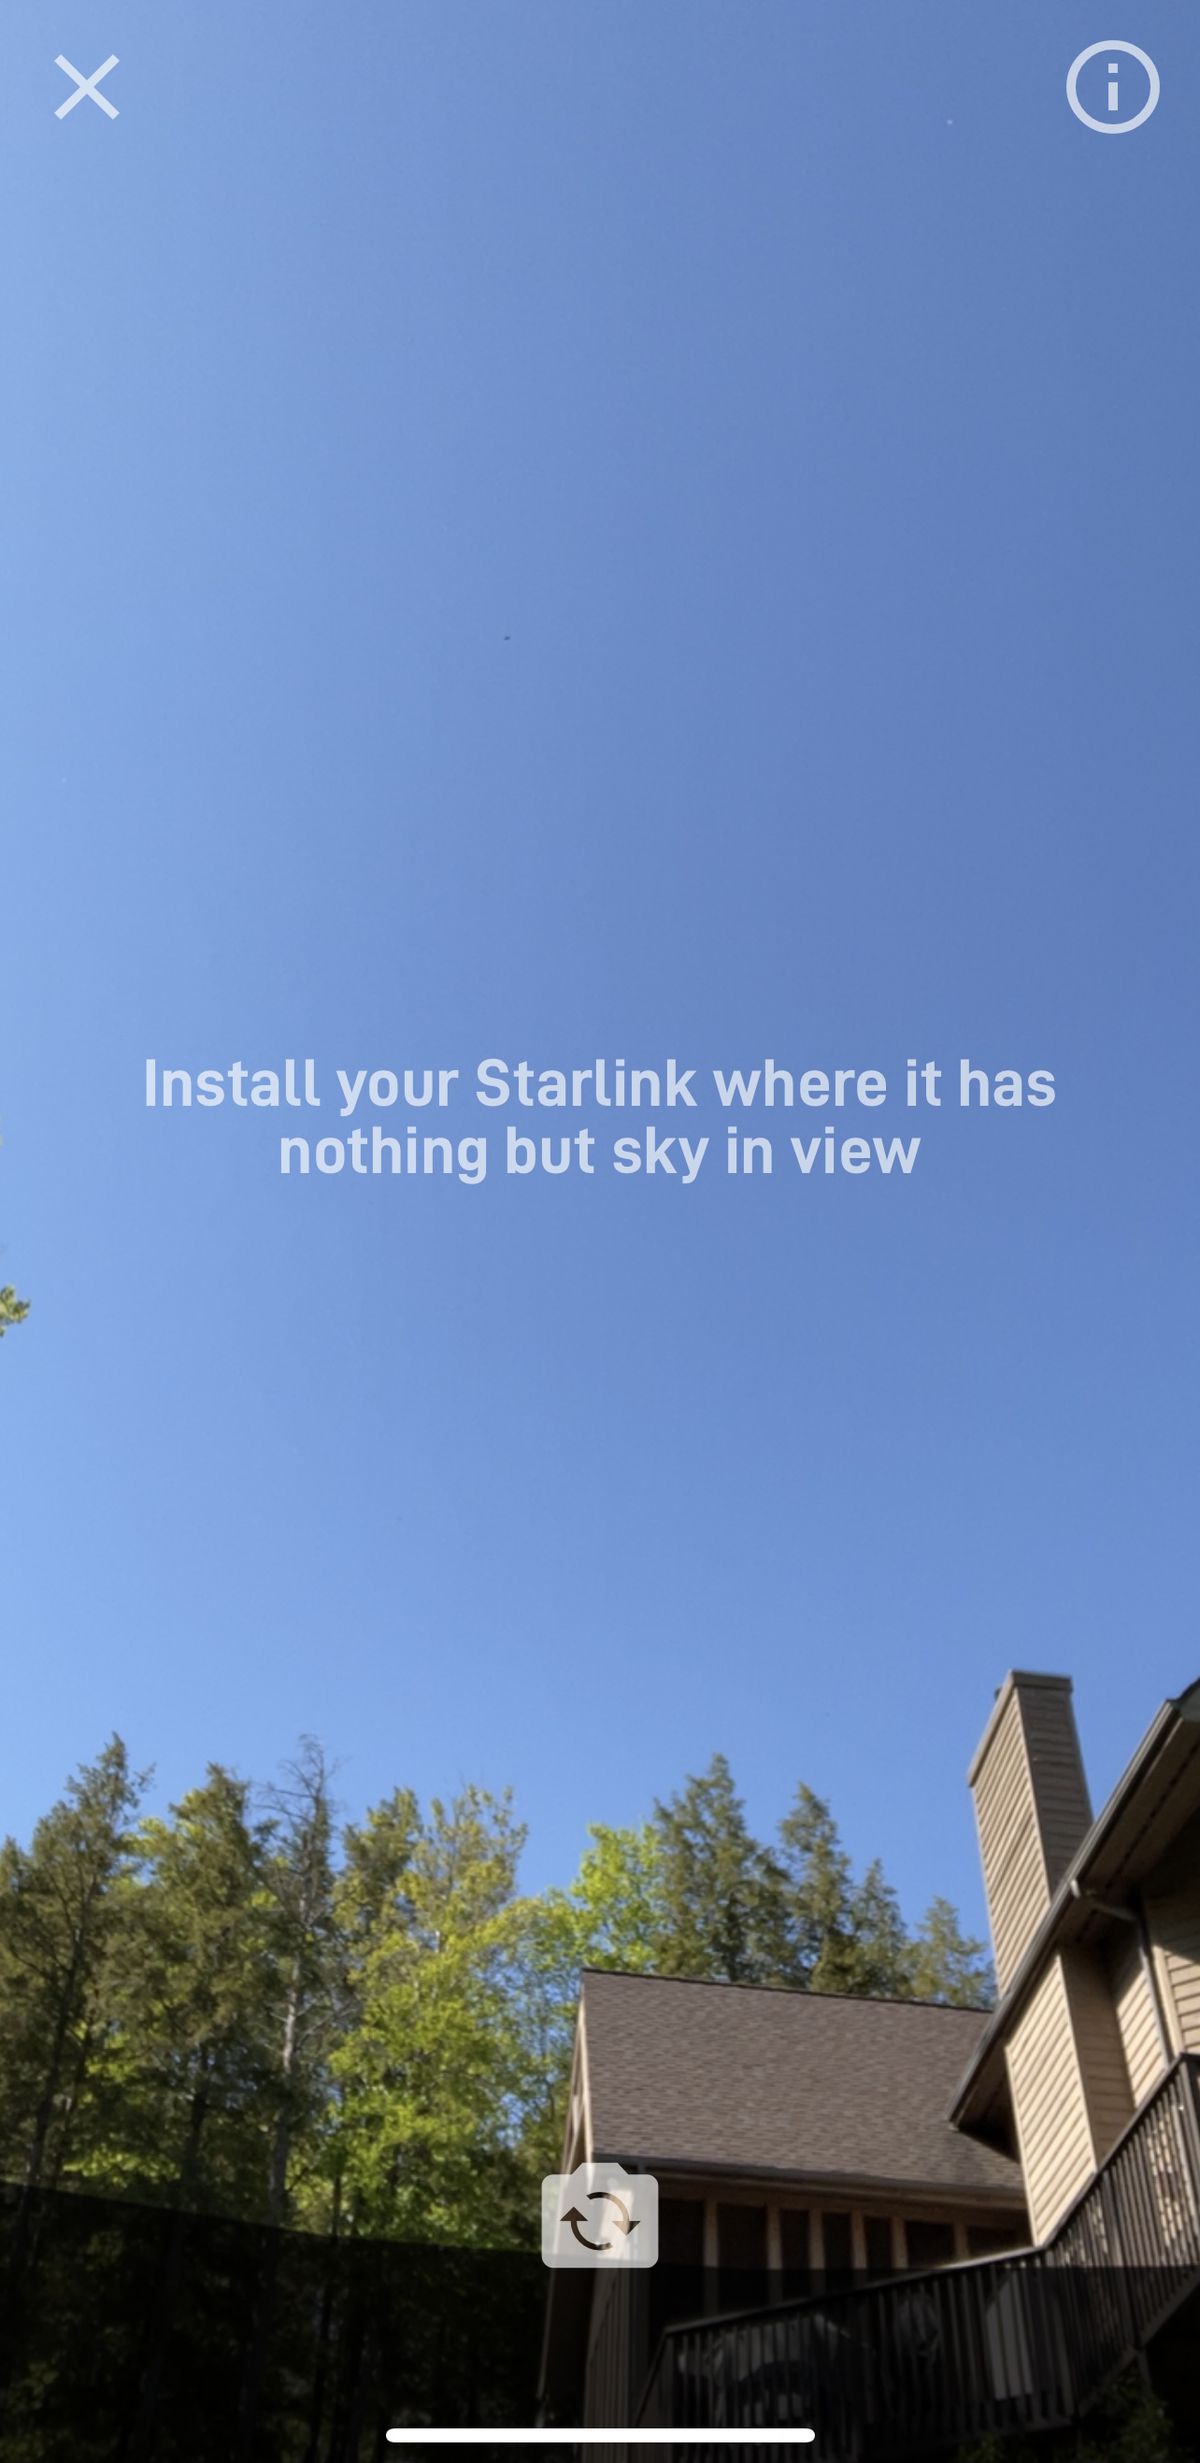 Starlink’s entire field of view is open sky except for the top of a house and the trees behind it, as seen from the app.